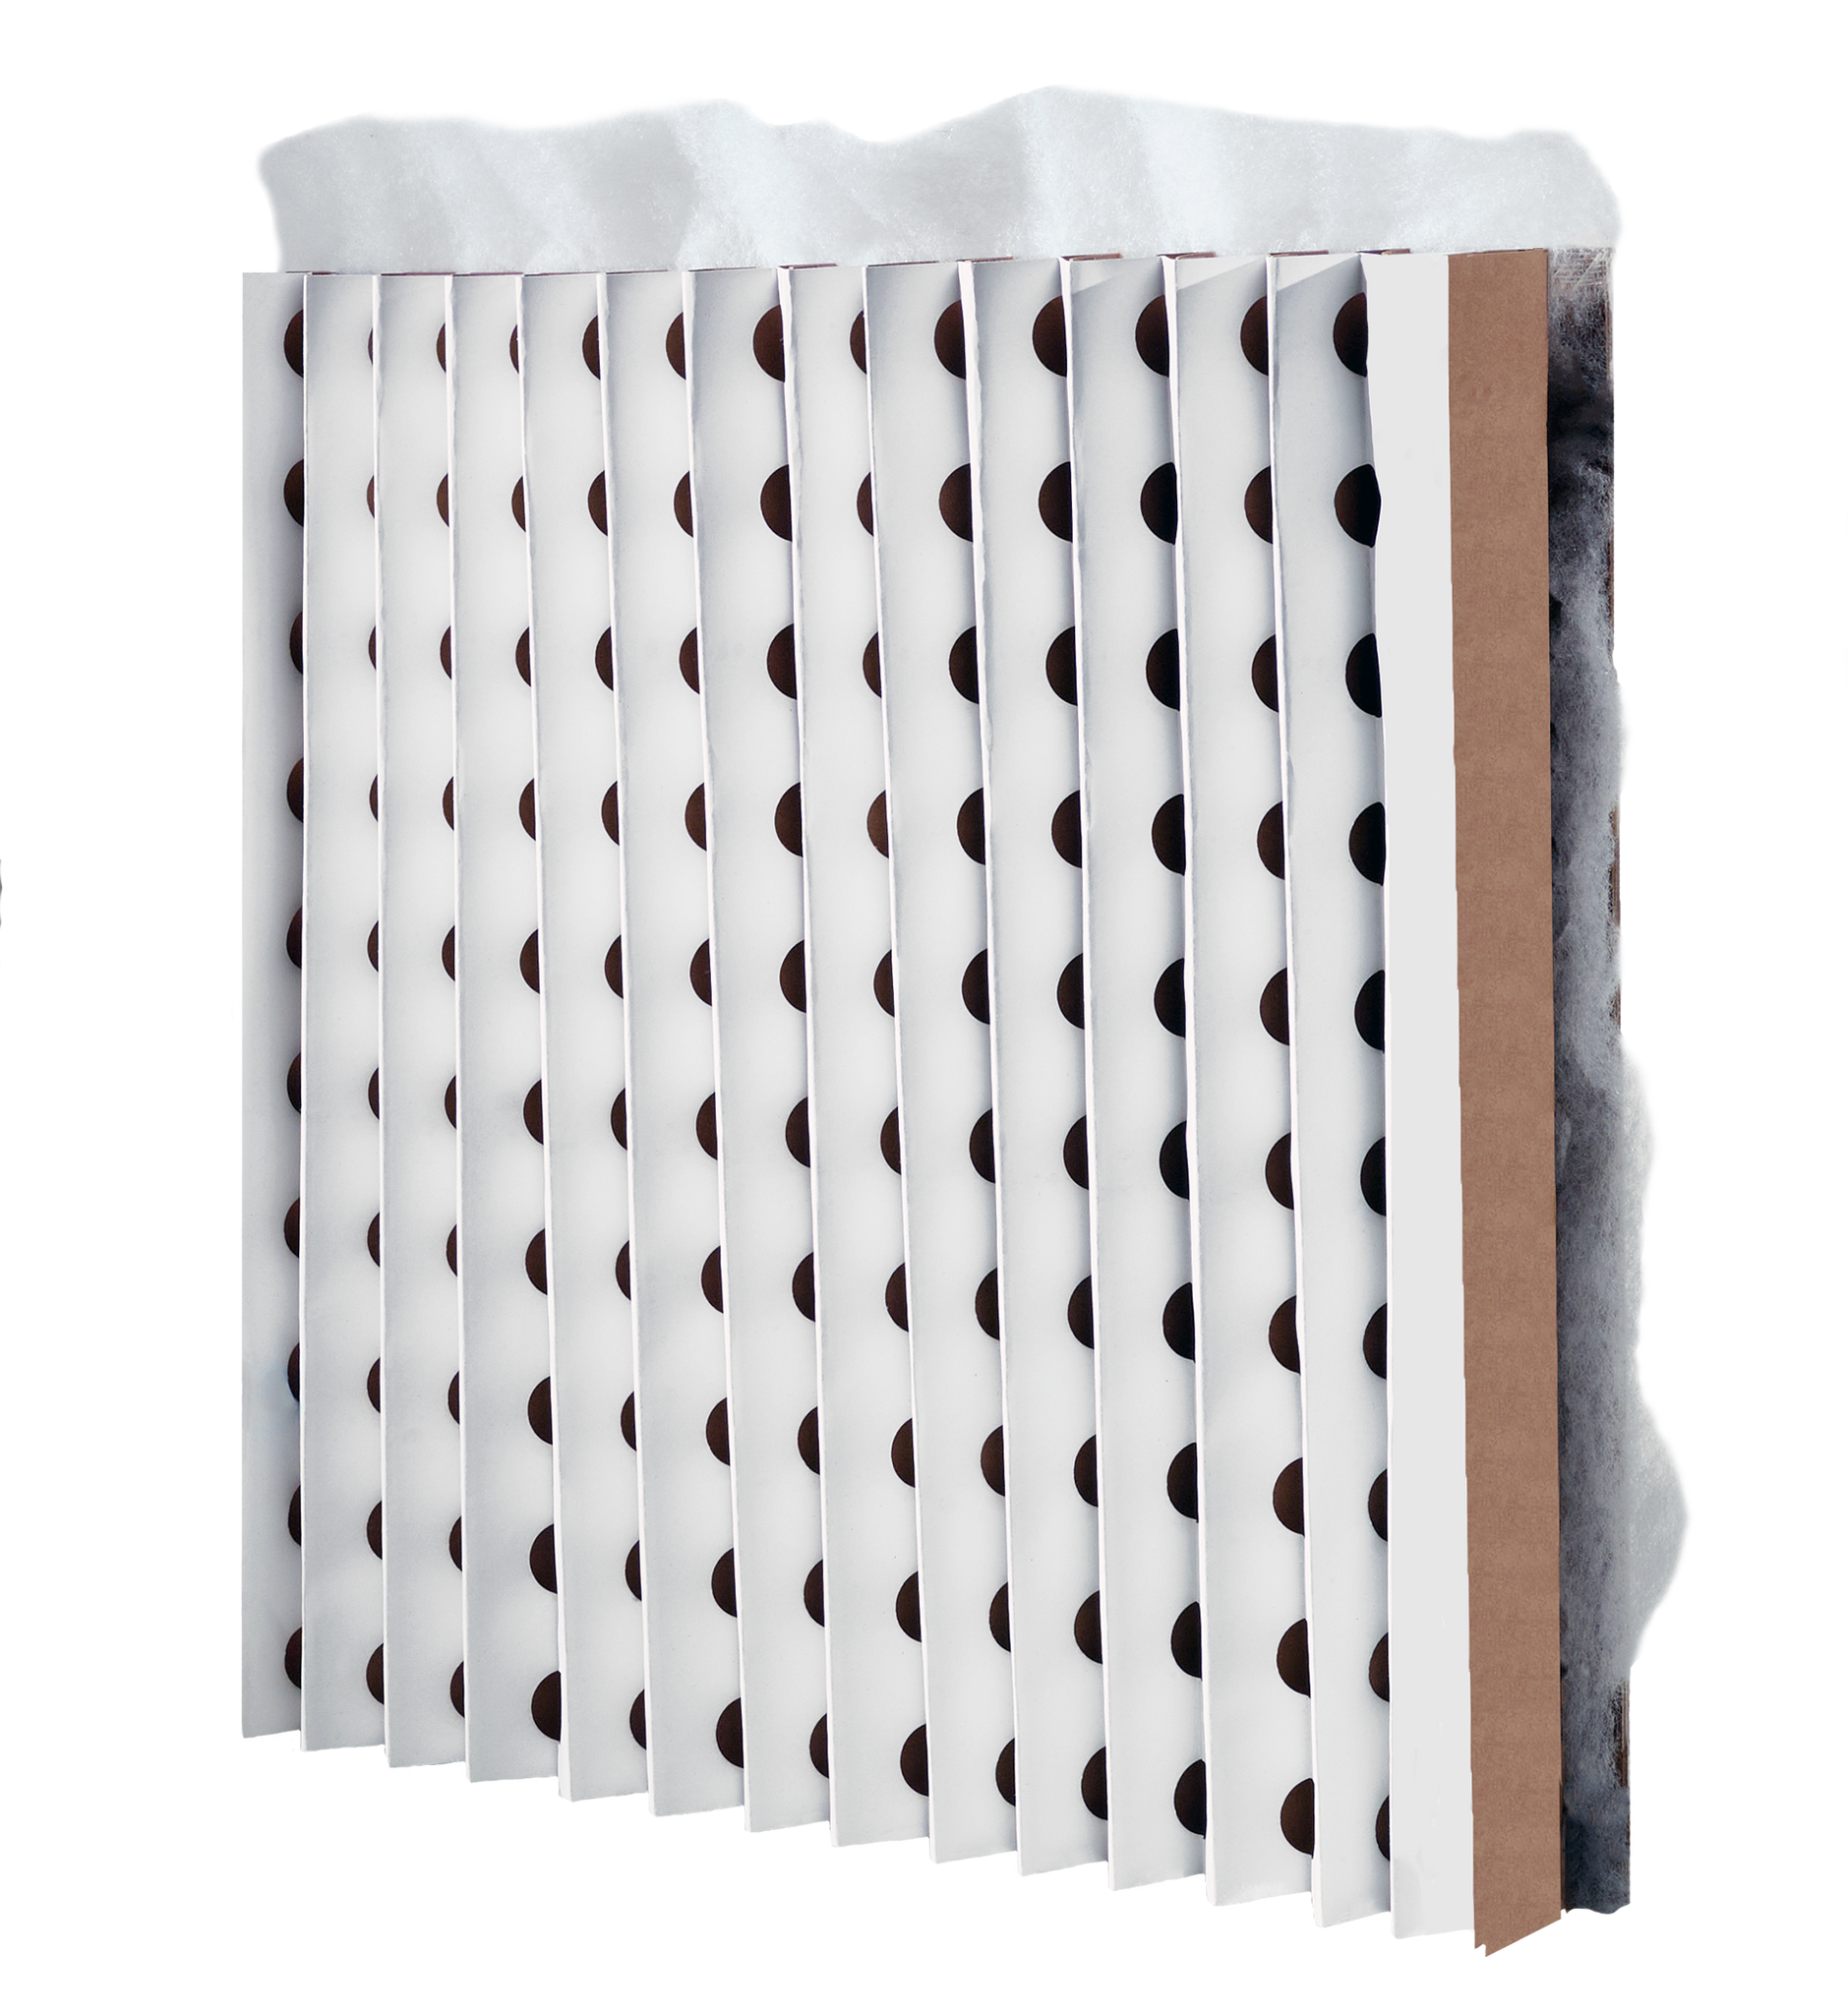 AF-923 Andreae High Efficiency Spray Booth Filters 36 x 30